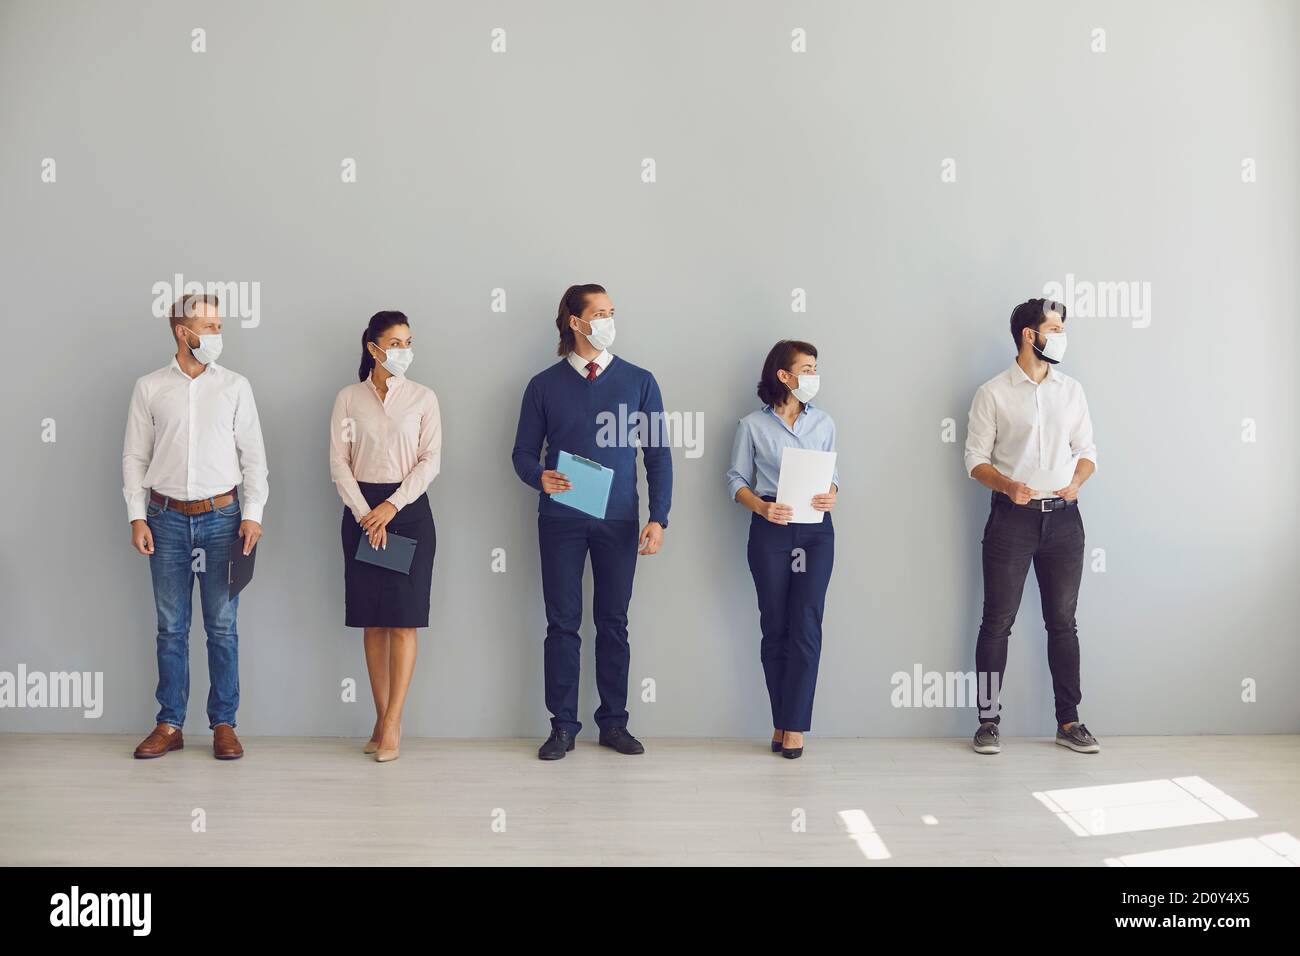 Job seekers in face masks waiting for job interview standing in corridor keeping safe distance Stock Photo